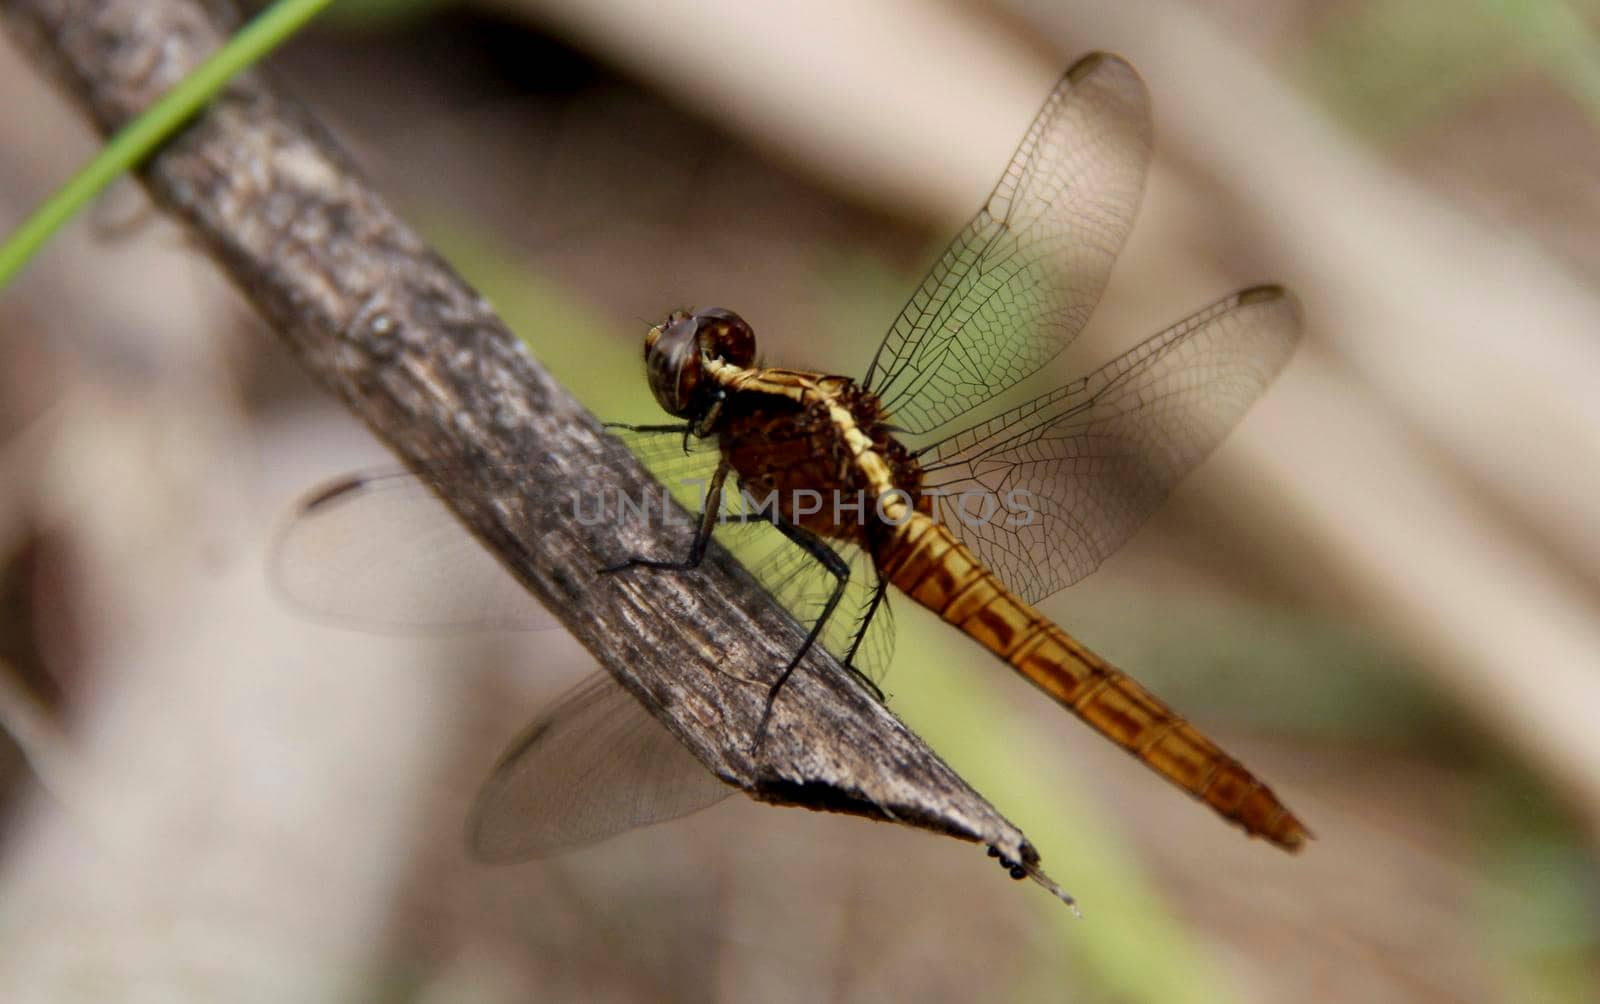 conde, bahia / brazil - july 26, 2014: Dragonfly is view garden inn in the city of Conde.